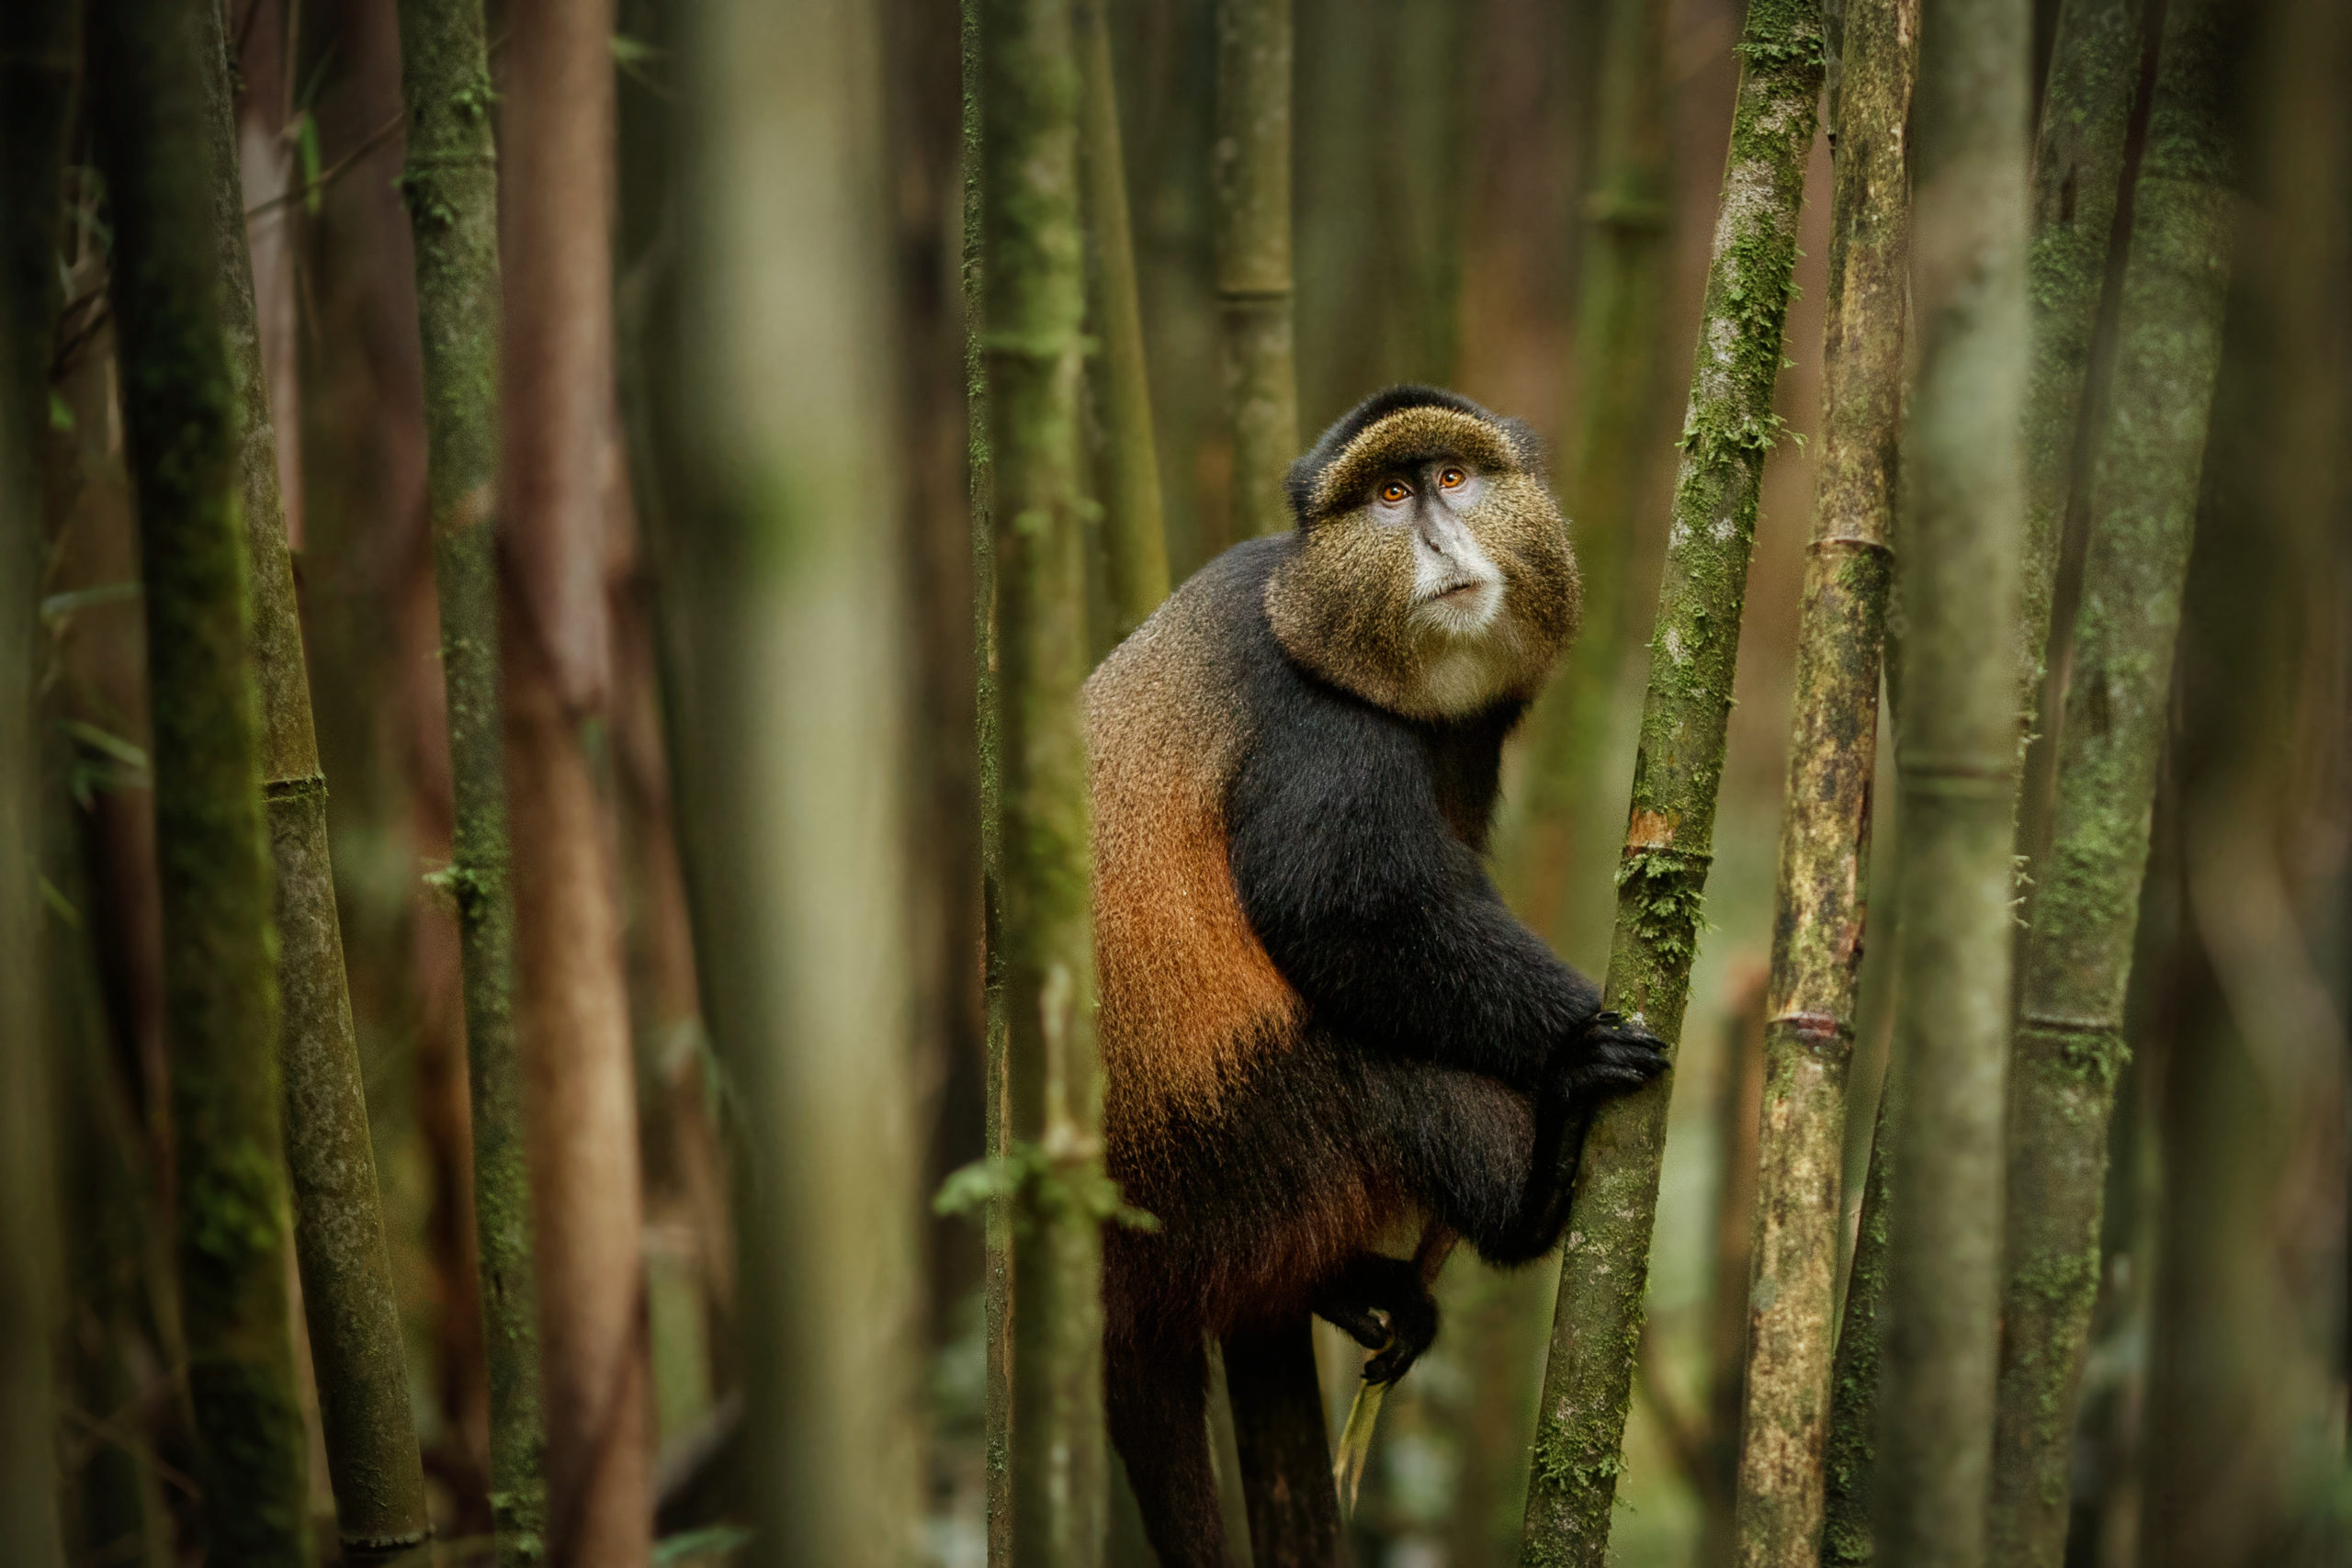 Wild and very rare golden monkey in the bamboo forest. Unique and endangered animal close up in nature habitat. African wildlife. Beautiful and charismatic creature. Golden monkey.Cercopithecus kandti